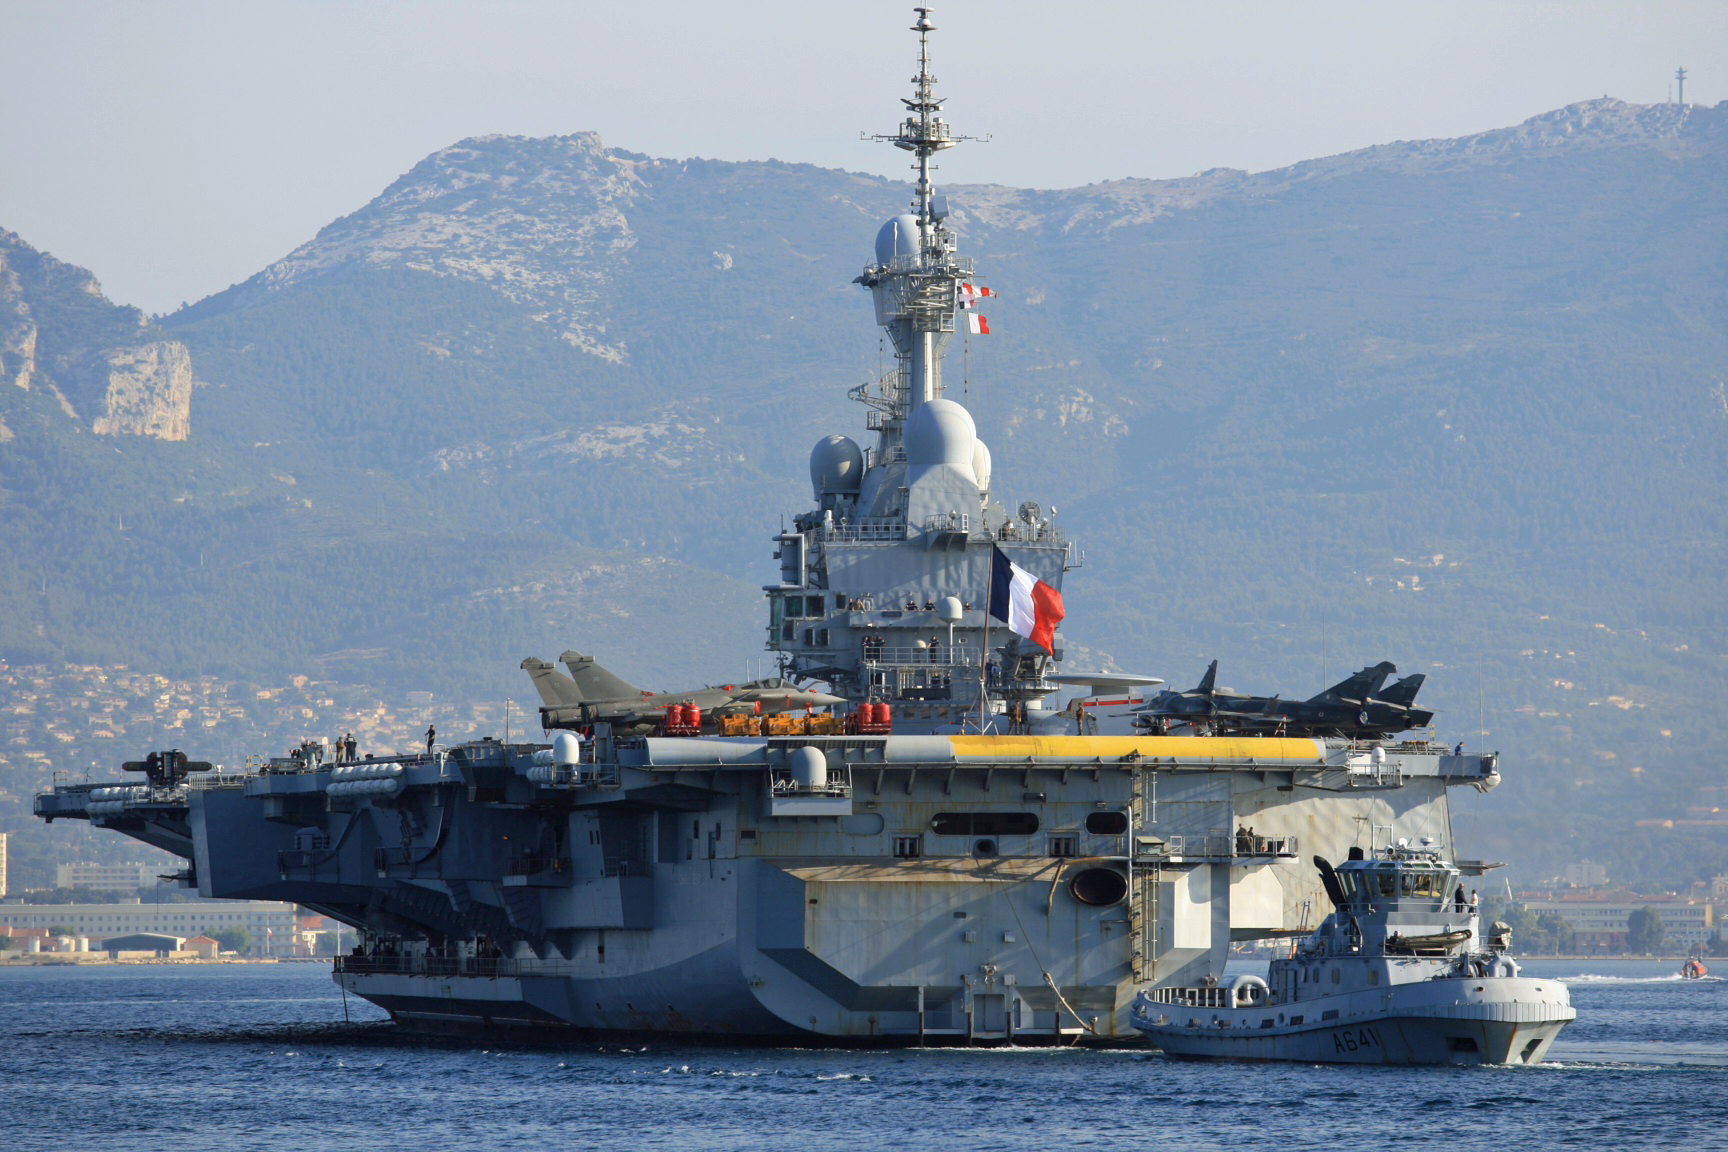 French Aircraft Carrier Charles De Gaulle (R91) Backgrounds, Compatible - PC, Mobile, Gadgets| 1728x1152 px